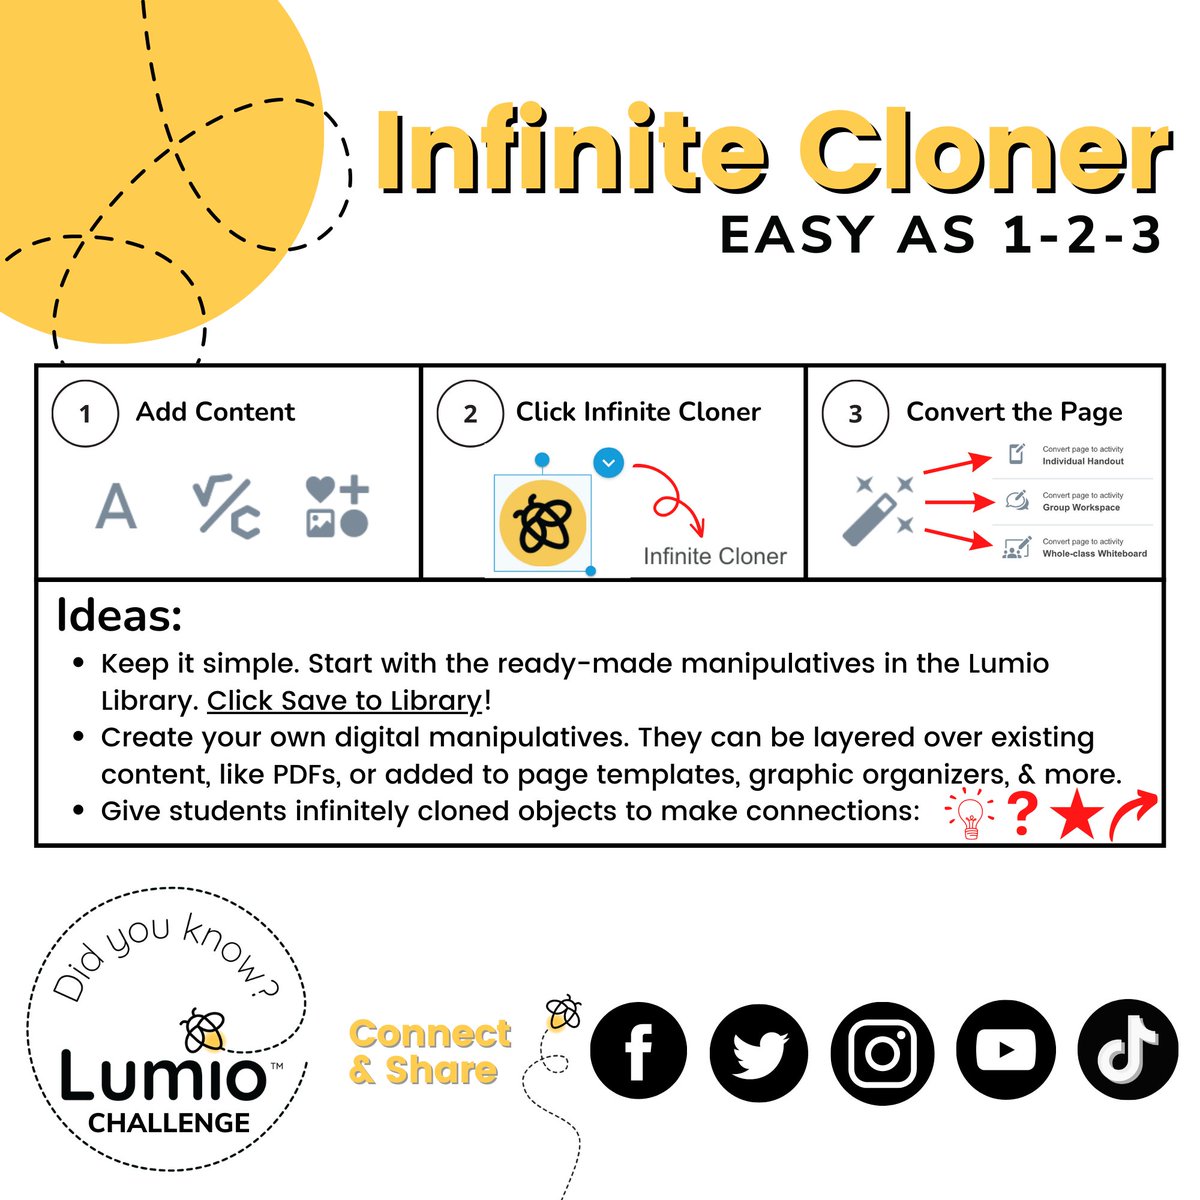 Looking for new ways to engage students in hands-on learning? Check out Lumio’s Infinite Cloner feature, which you can use to turn any object into a digital manipulative. Challenge yourself to try it out this month! @LumioSocial